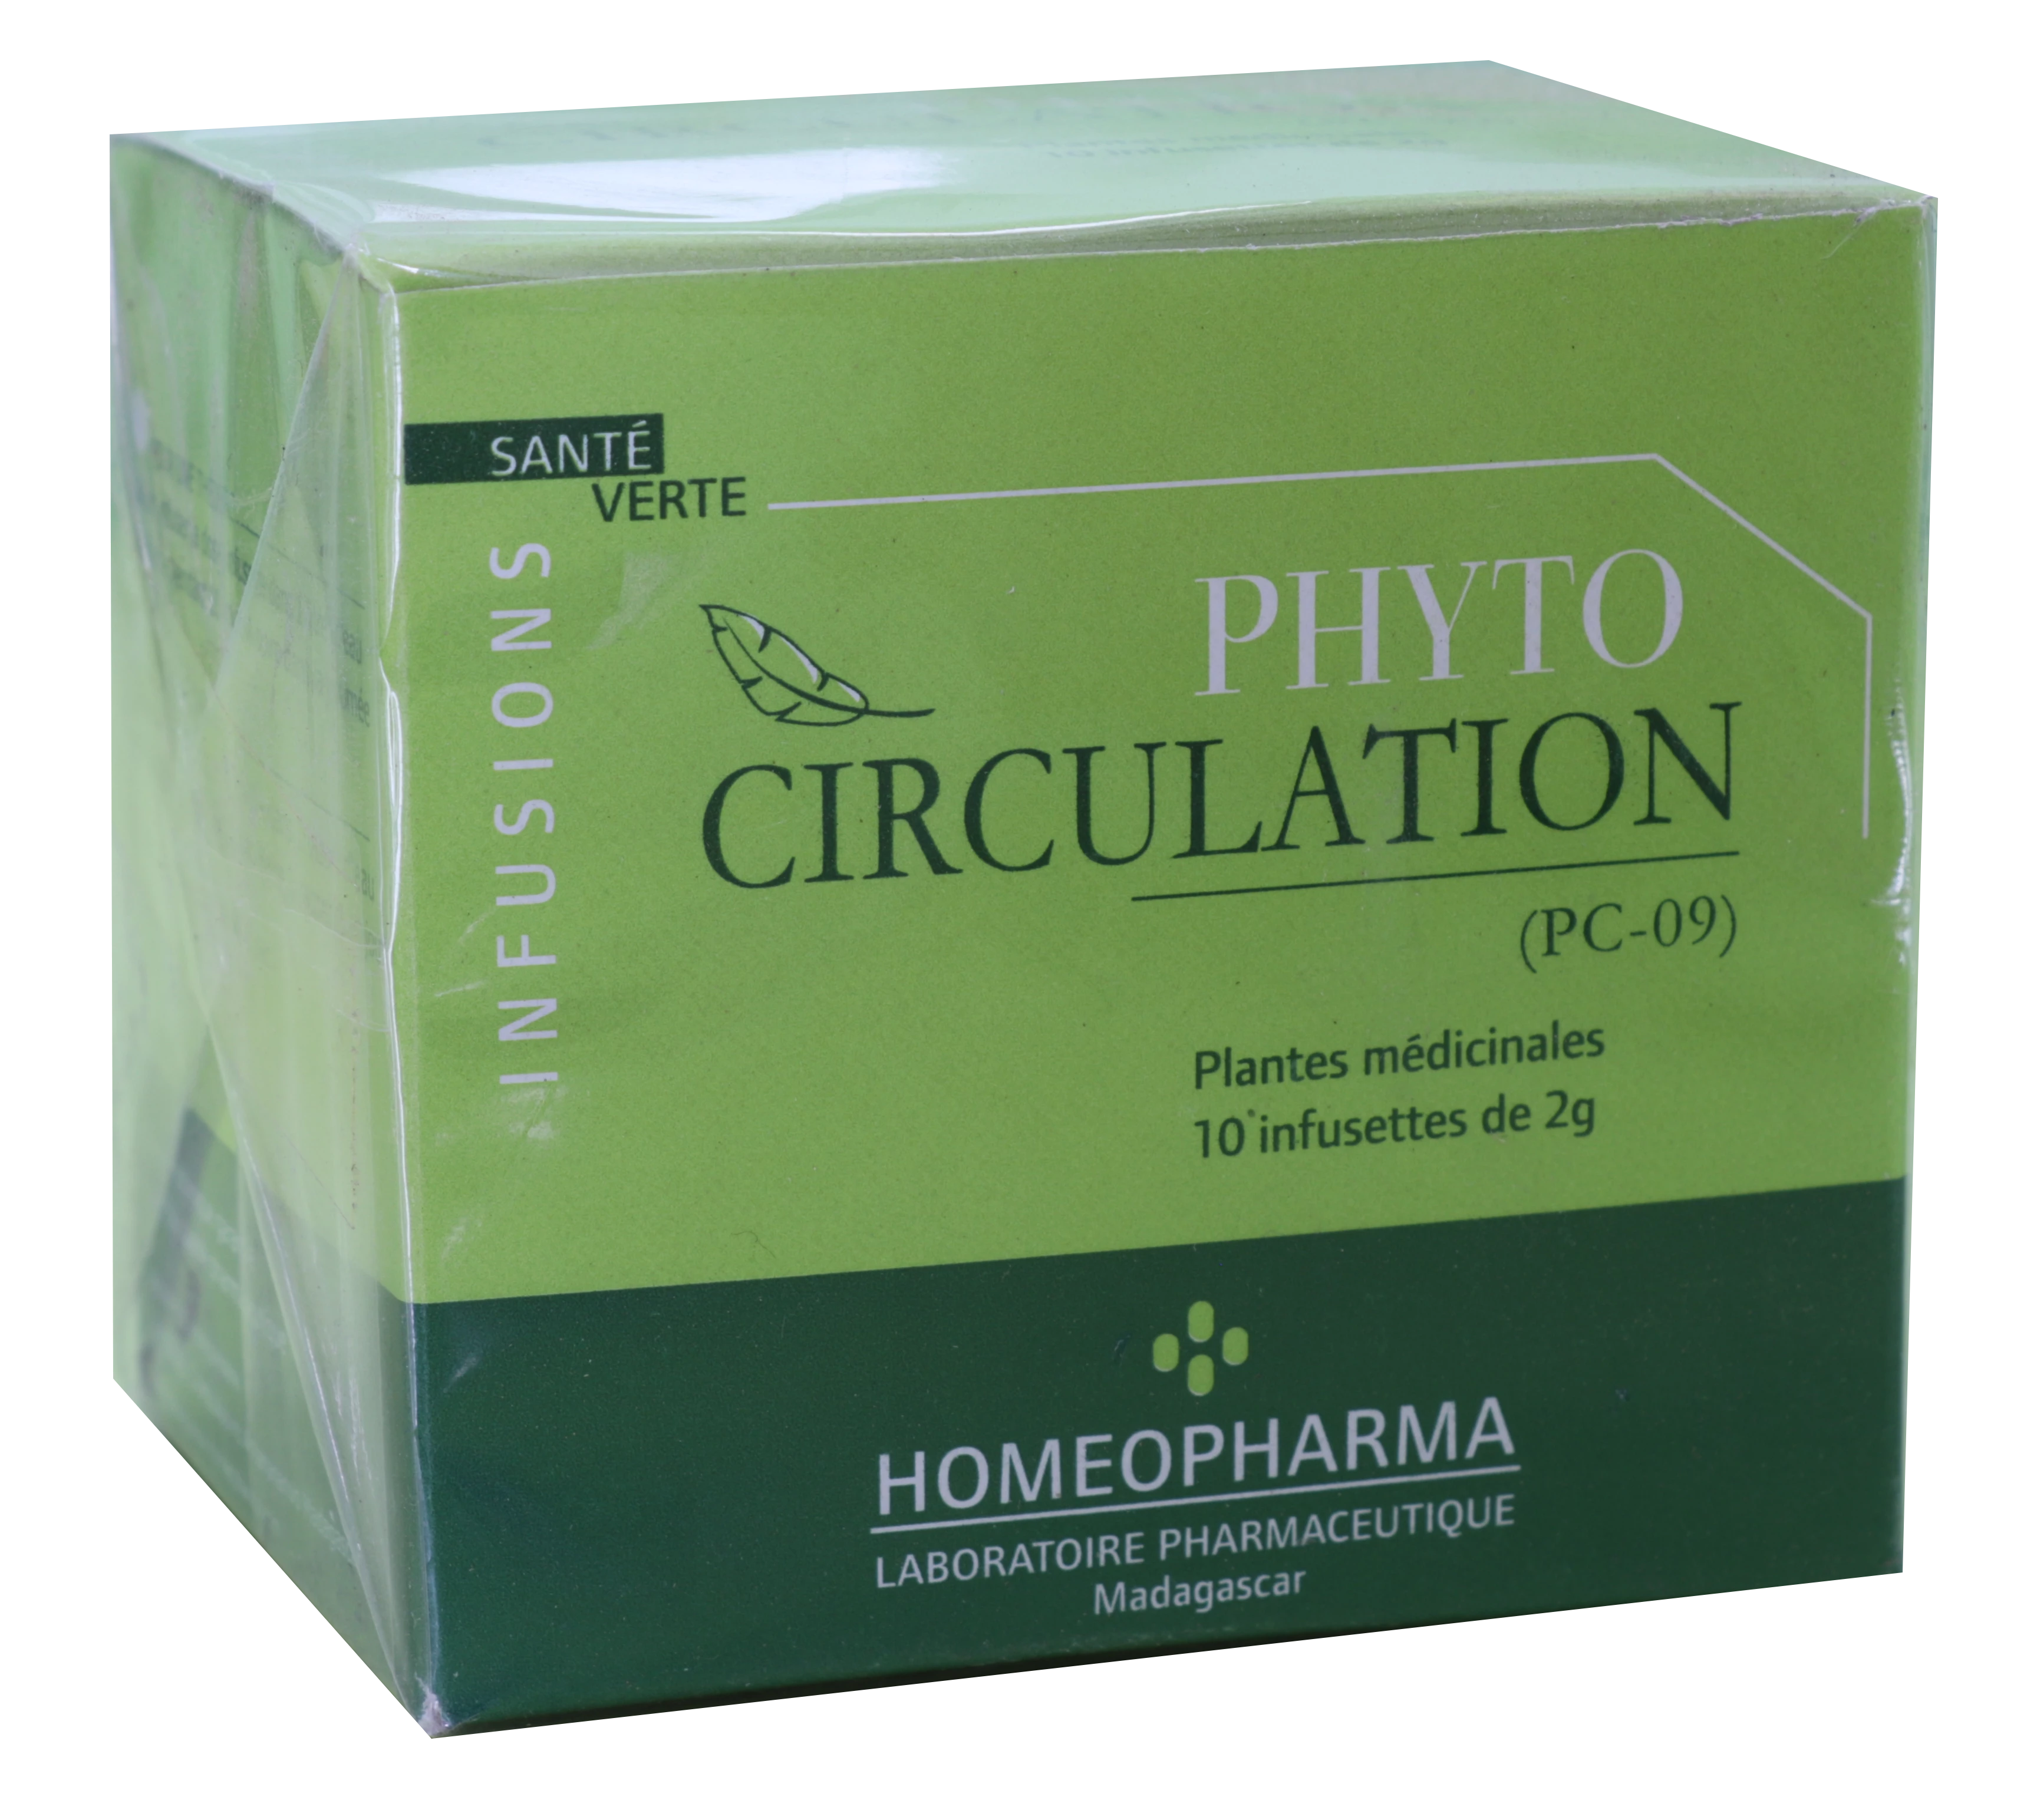 Phytotherapie Traditionnelle  Pc09-phyto-circulation Bte / 20 Infusettes - Homeopharma